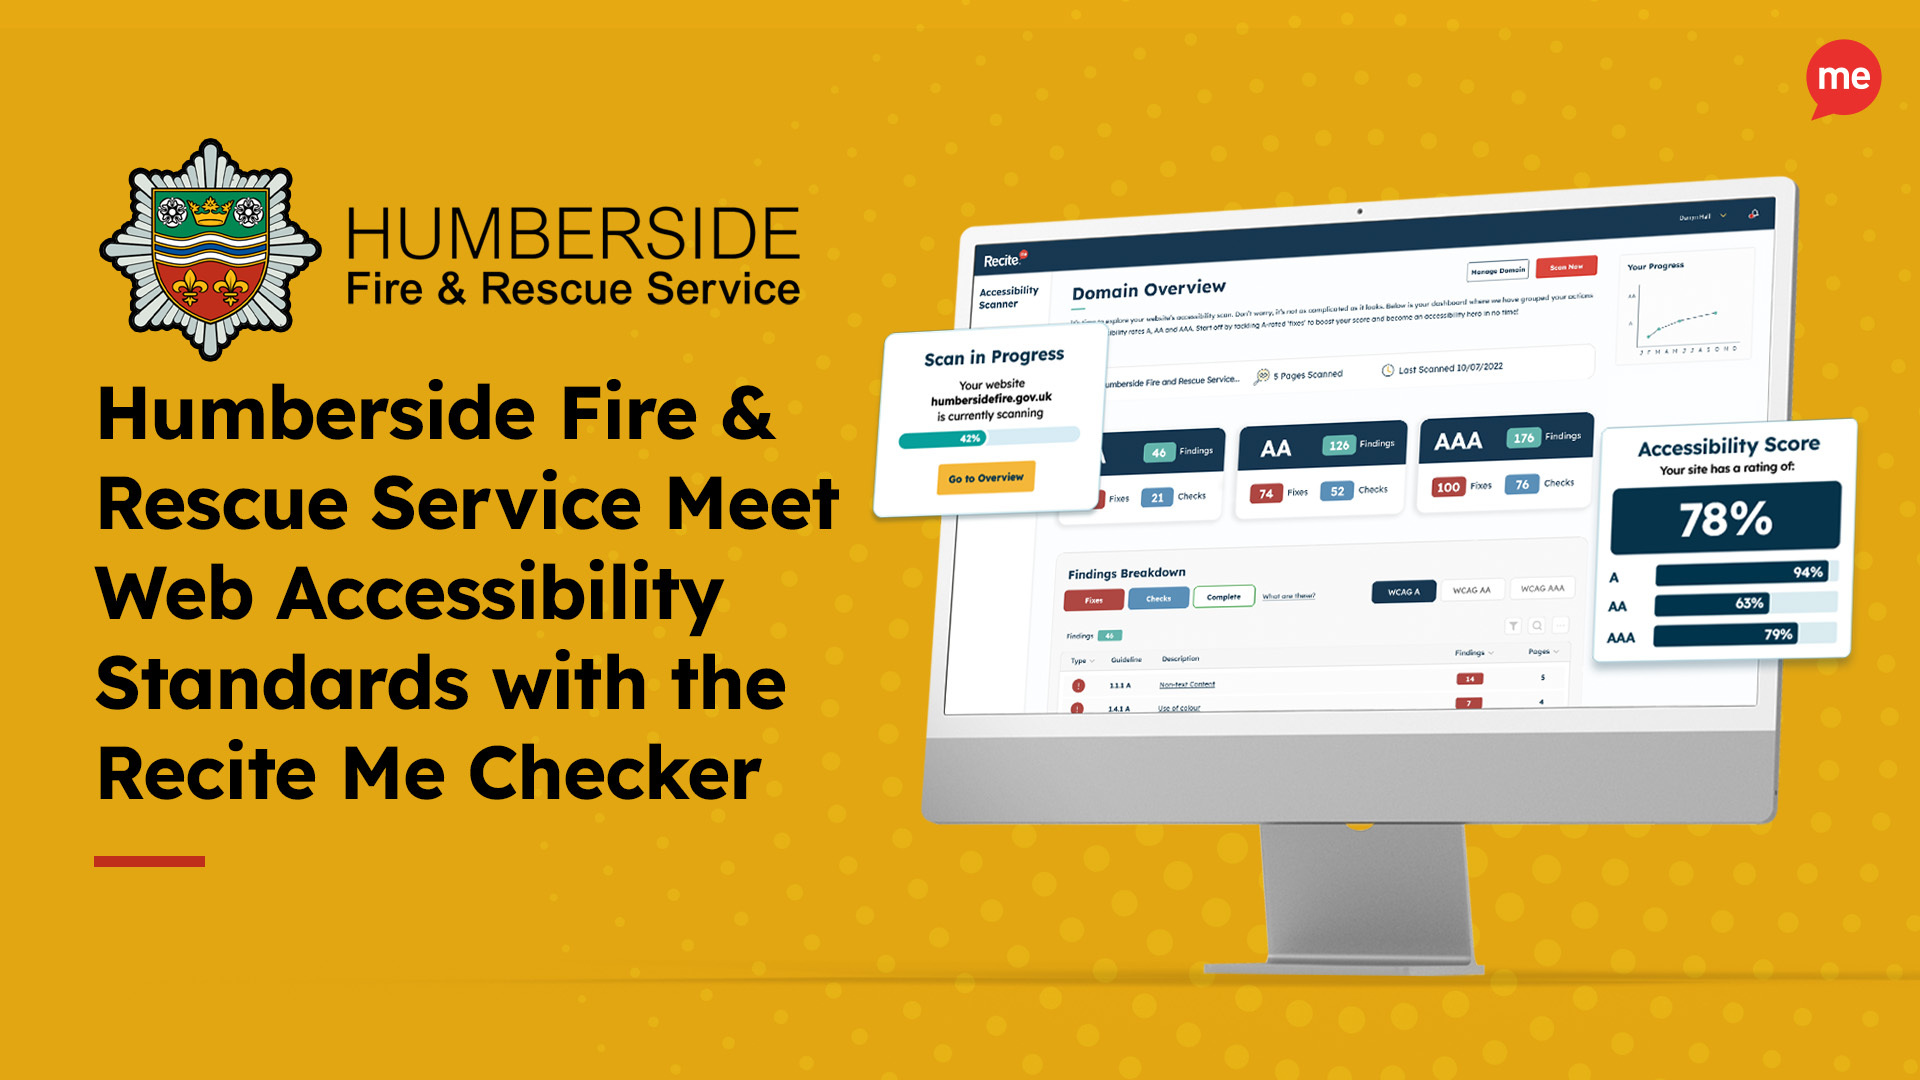 Humberside Fire & Rescue Service Meet Web Accessibility Standards with the Recite Me Checker